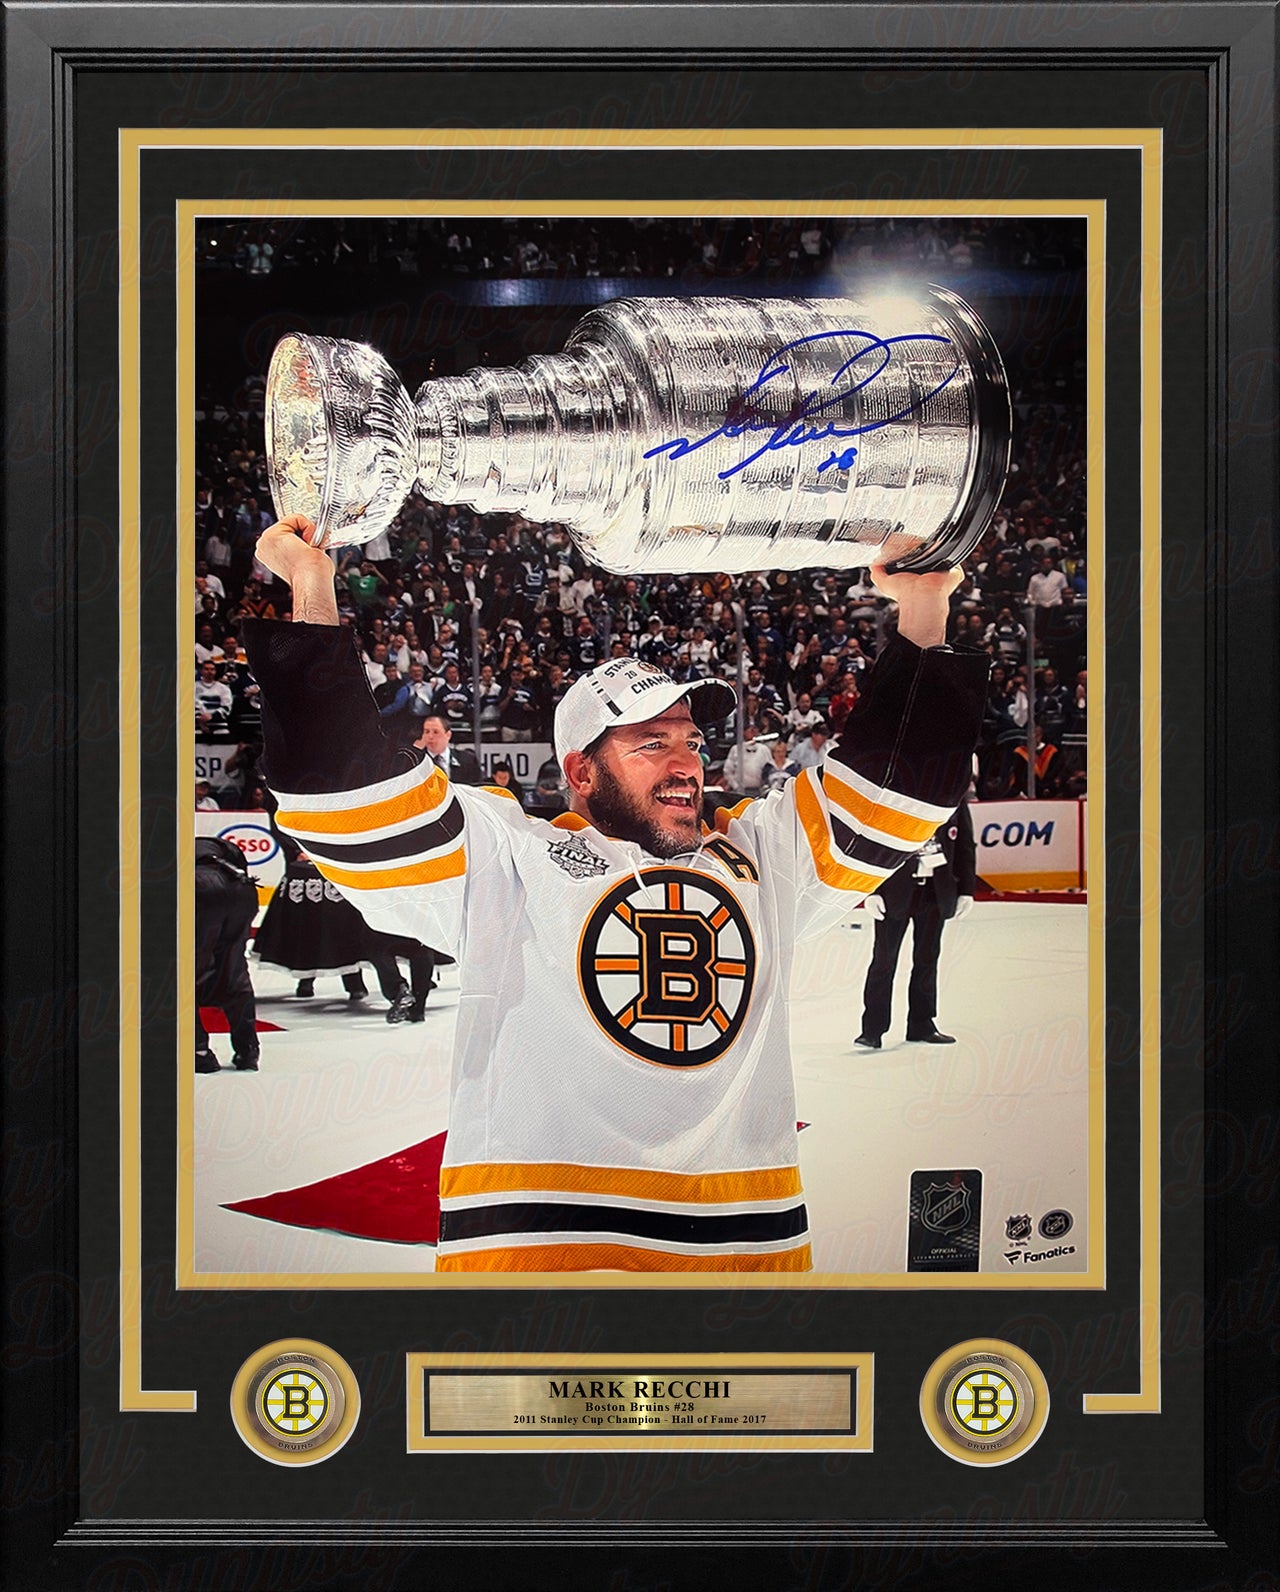 Mark Recchi 2011 Stanley Cup Champions Boston Bruins Autographed 11" x 14" Framed Hockey Photo